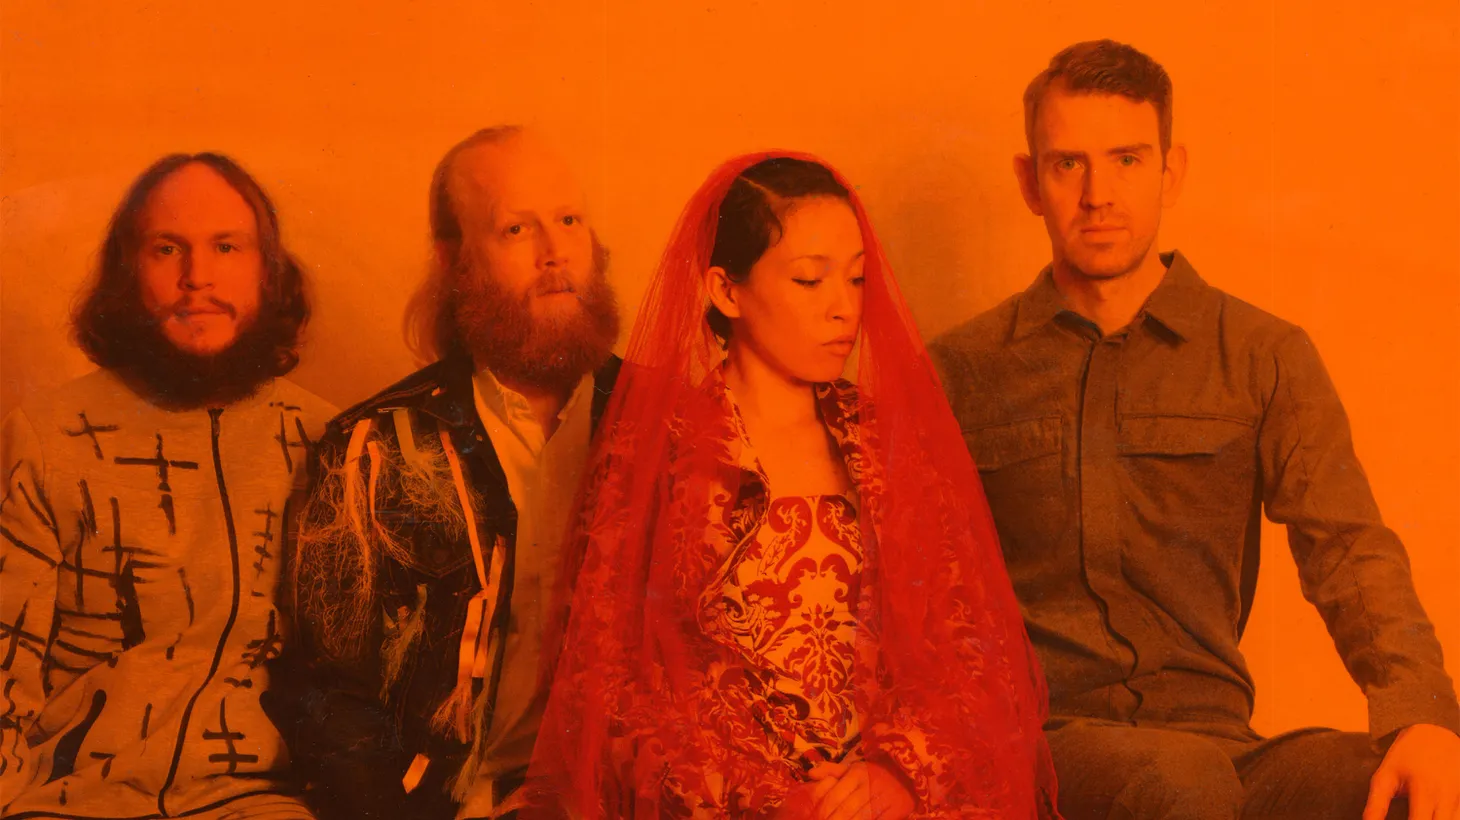 We've been anxiously awaiting a new album from Sweden's Little Dragon.